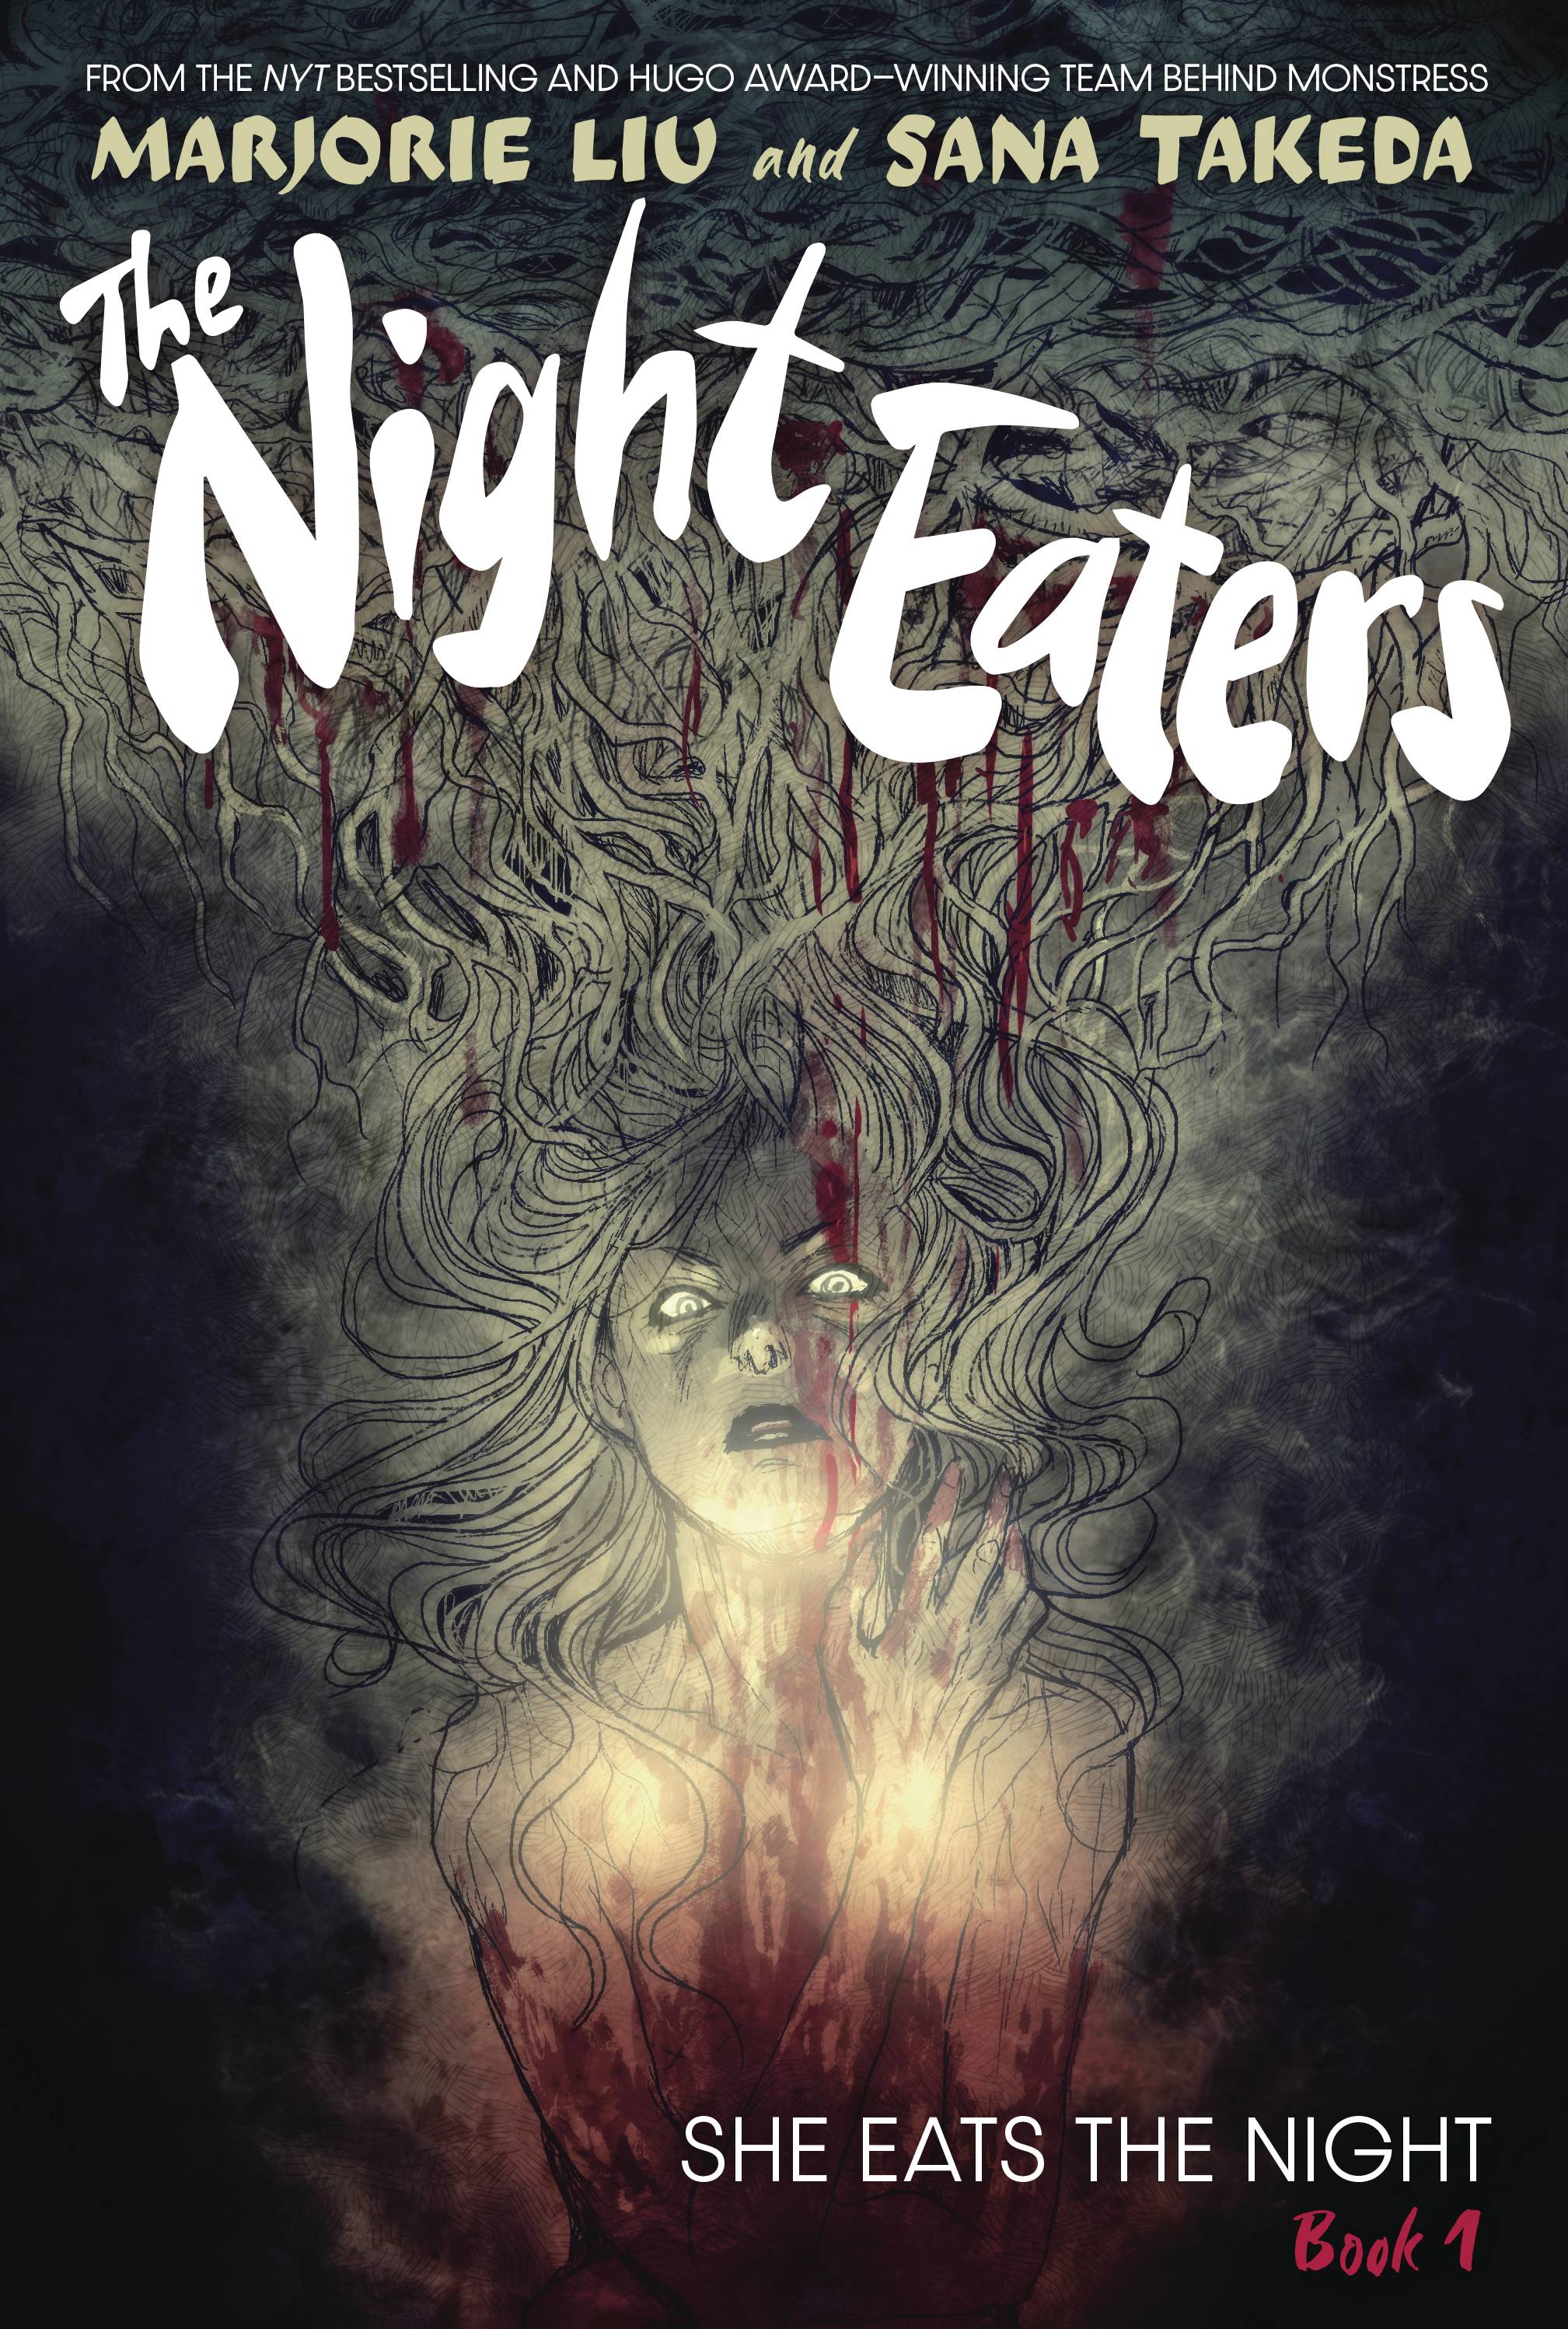 NIGHT EATERS GN VOL 01 SHE EATS AT NIGHT SGN PX ED